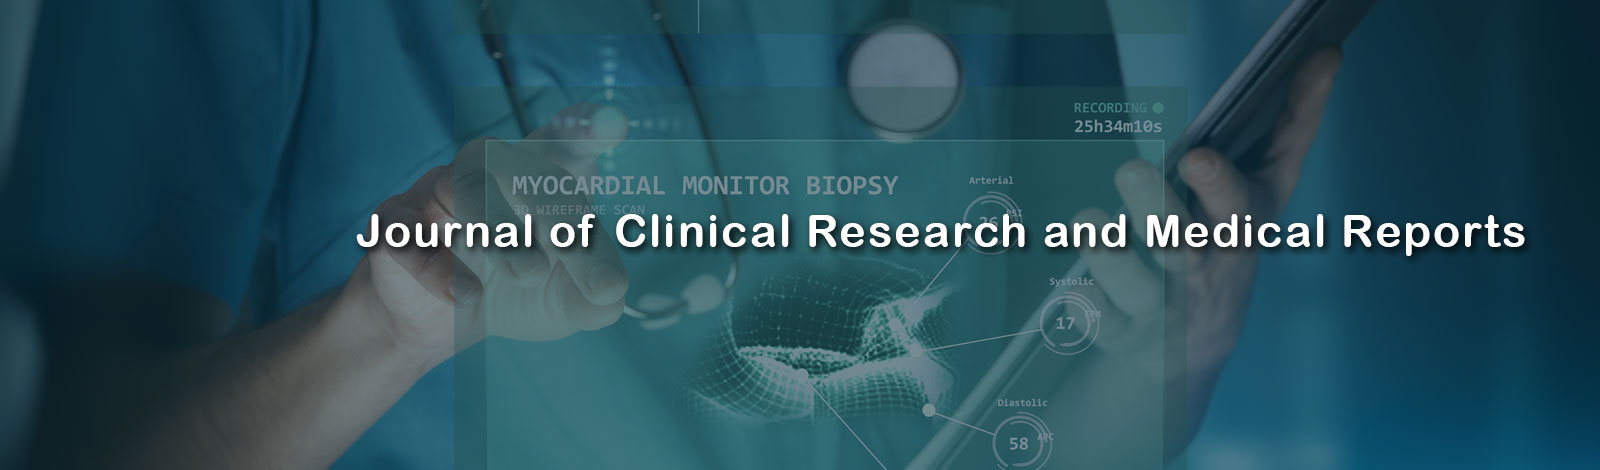 Journal of Clinical Research and Medical Reports